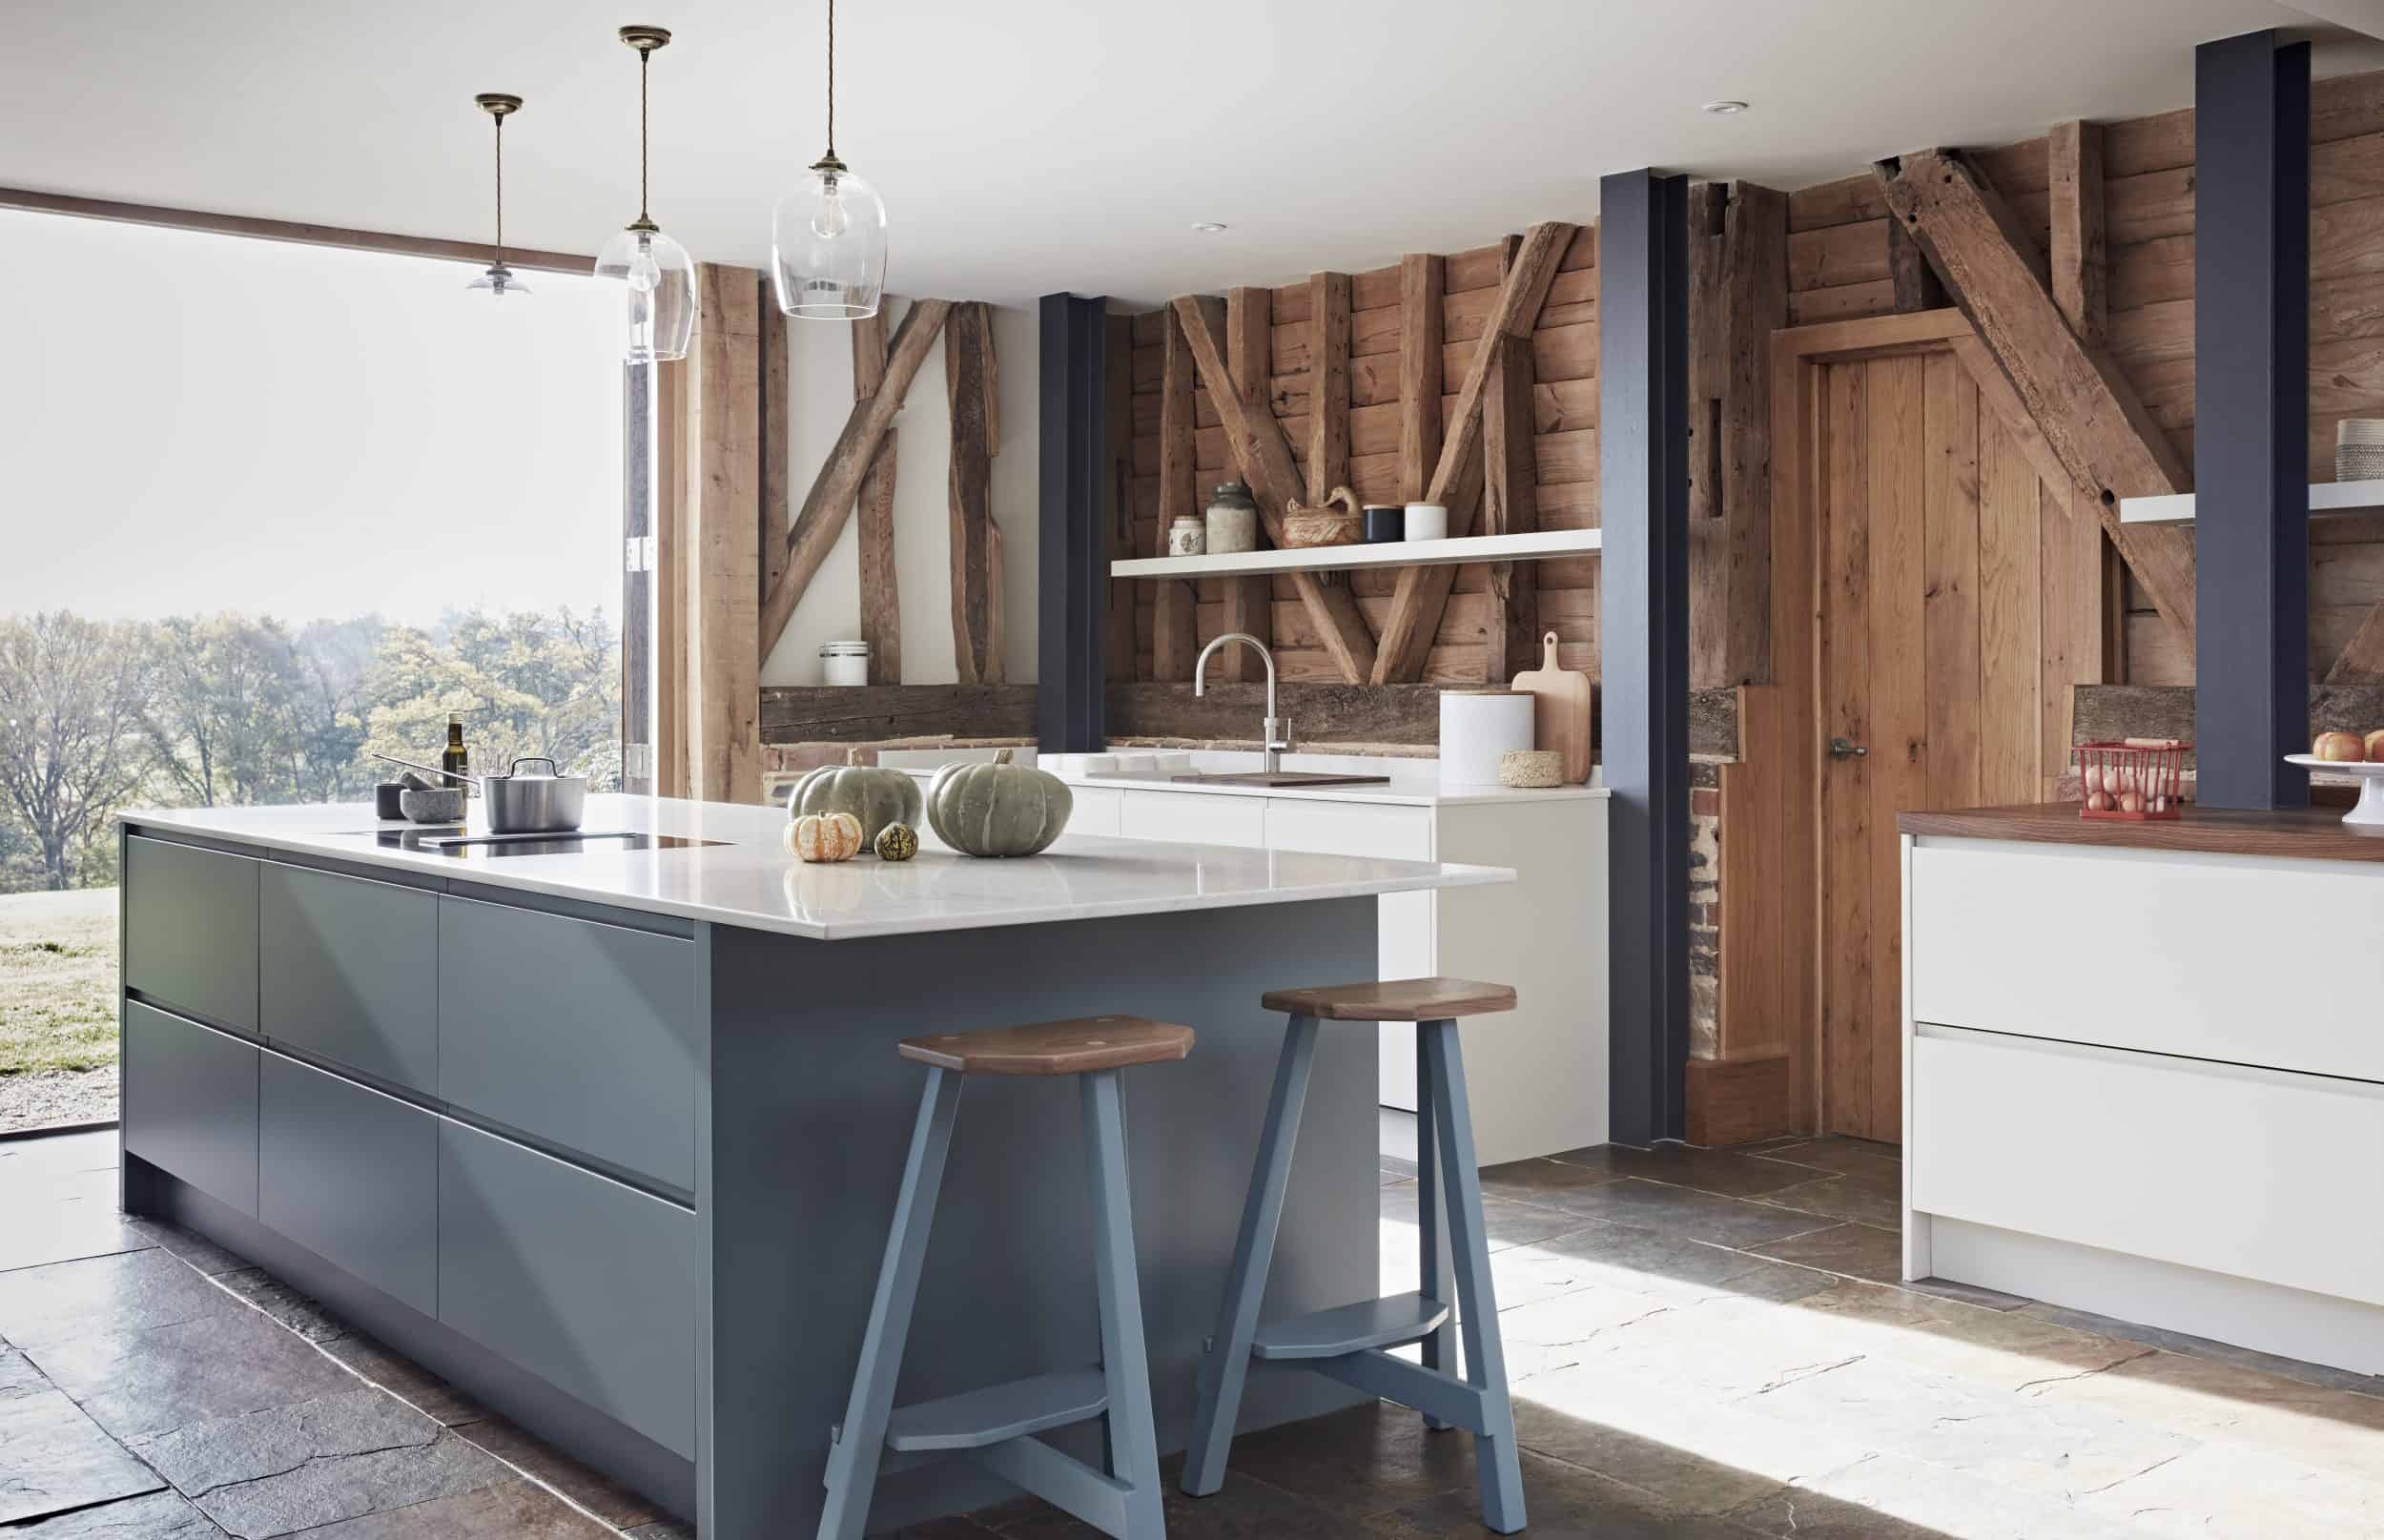 John Lewis of Hungerford cottage kitchen barn style with blue kitchen island and white worktops